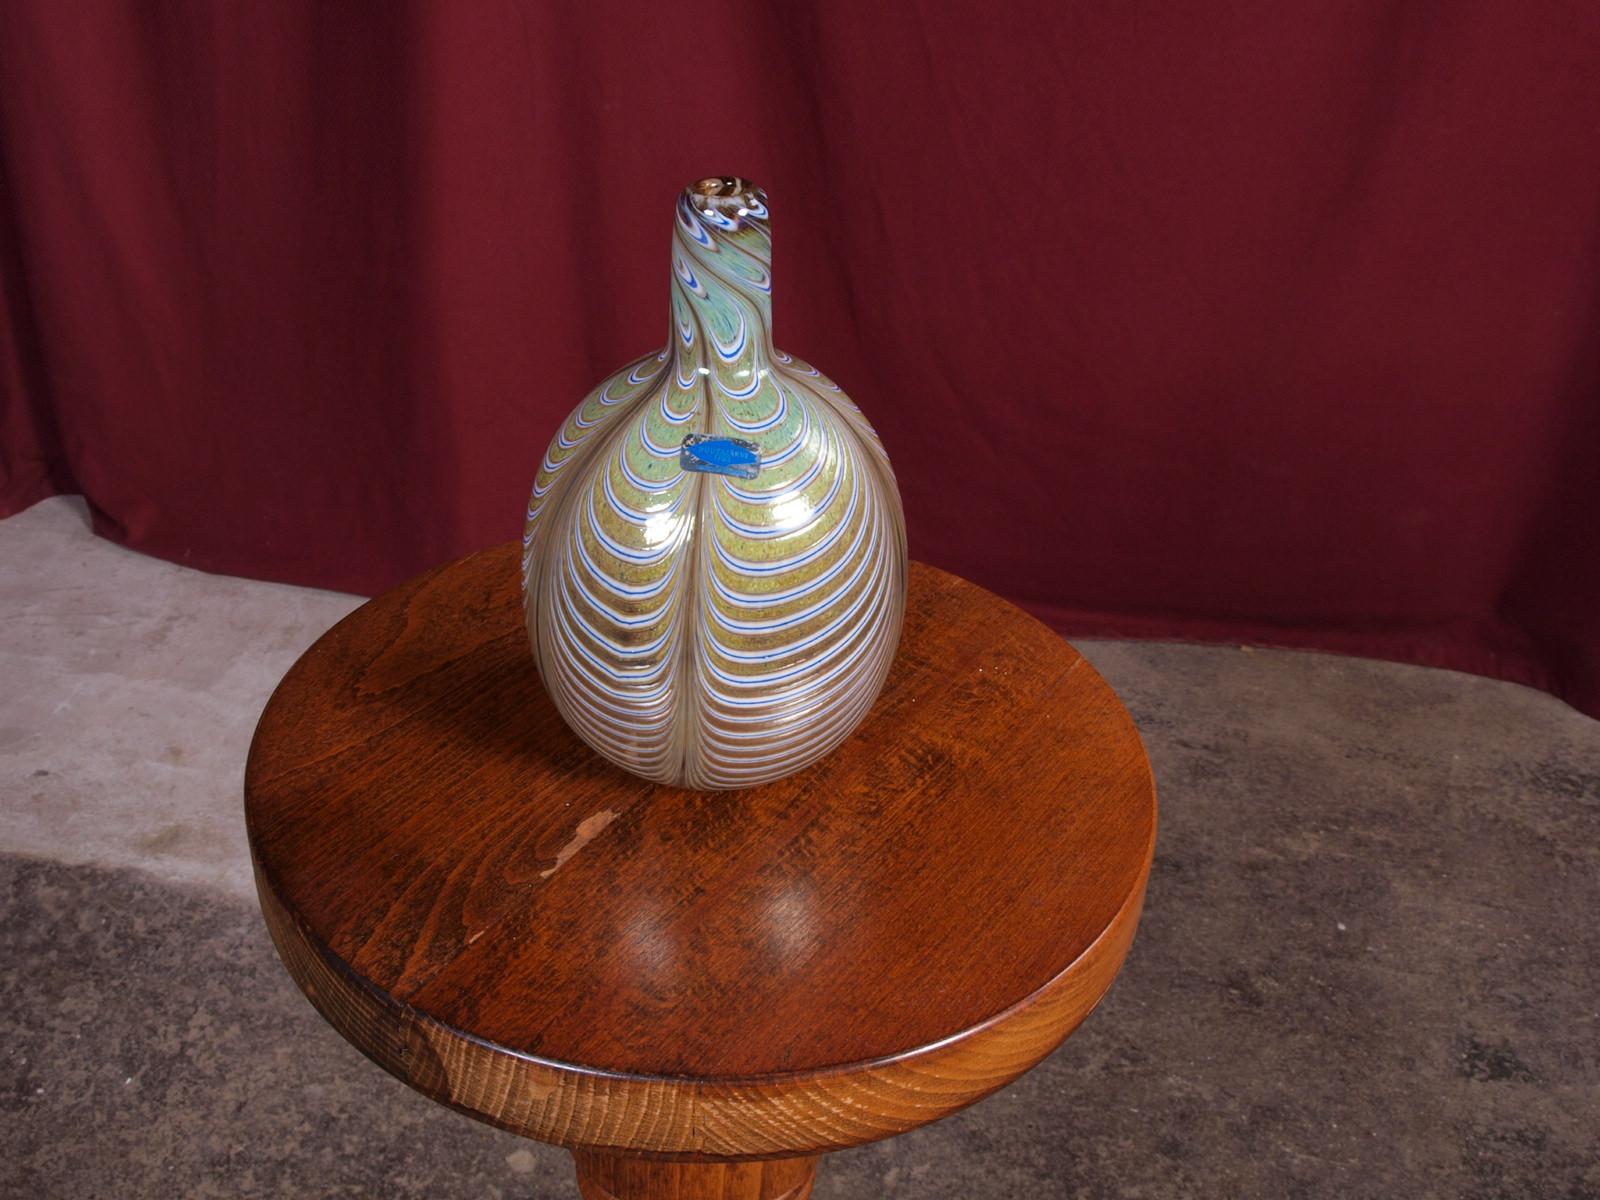 Rare Vase by Oiva Toikka (1931-2019) for Nuutajärvi Notsjö, Finland.

With the Spherical shape, narrow, almost cylindrical neck, this vase is a little jewel. It has a very delicate size and will fit in any display.


The designer is well known